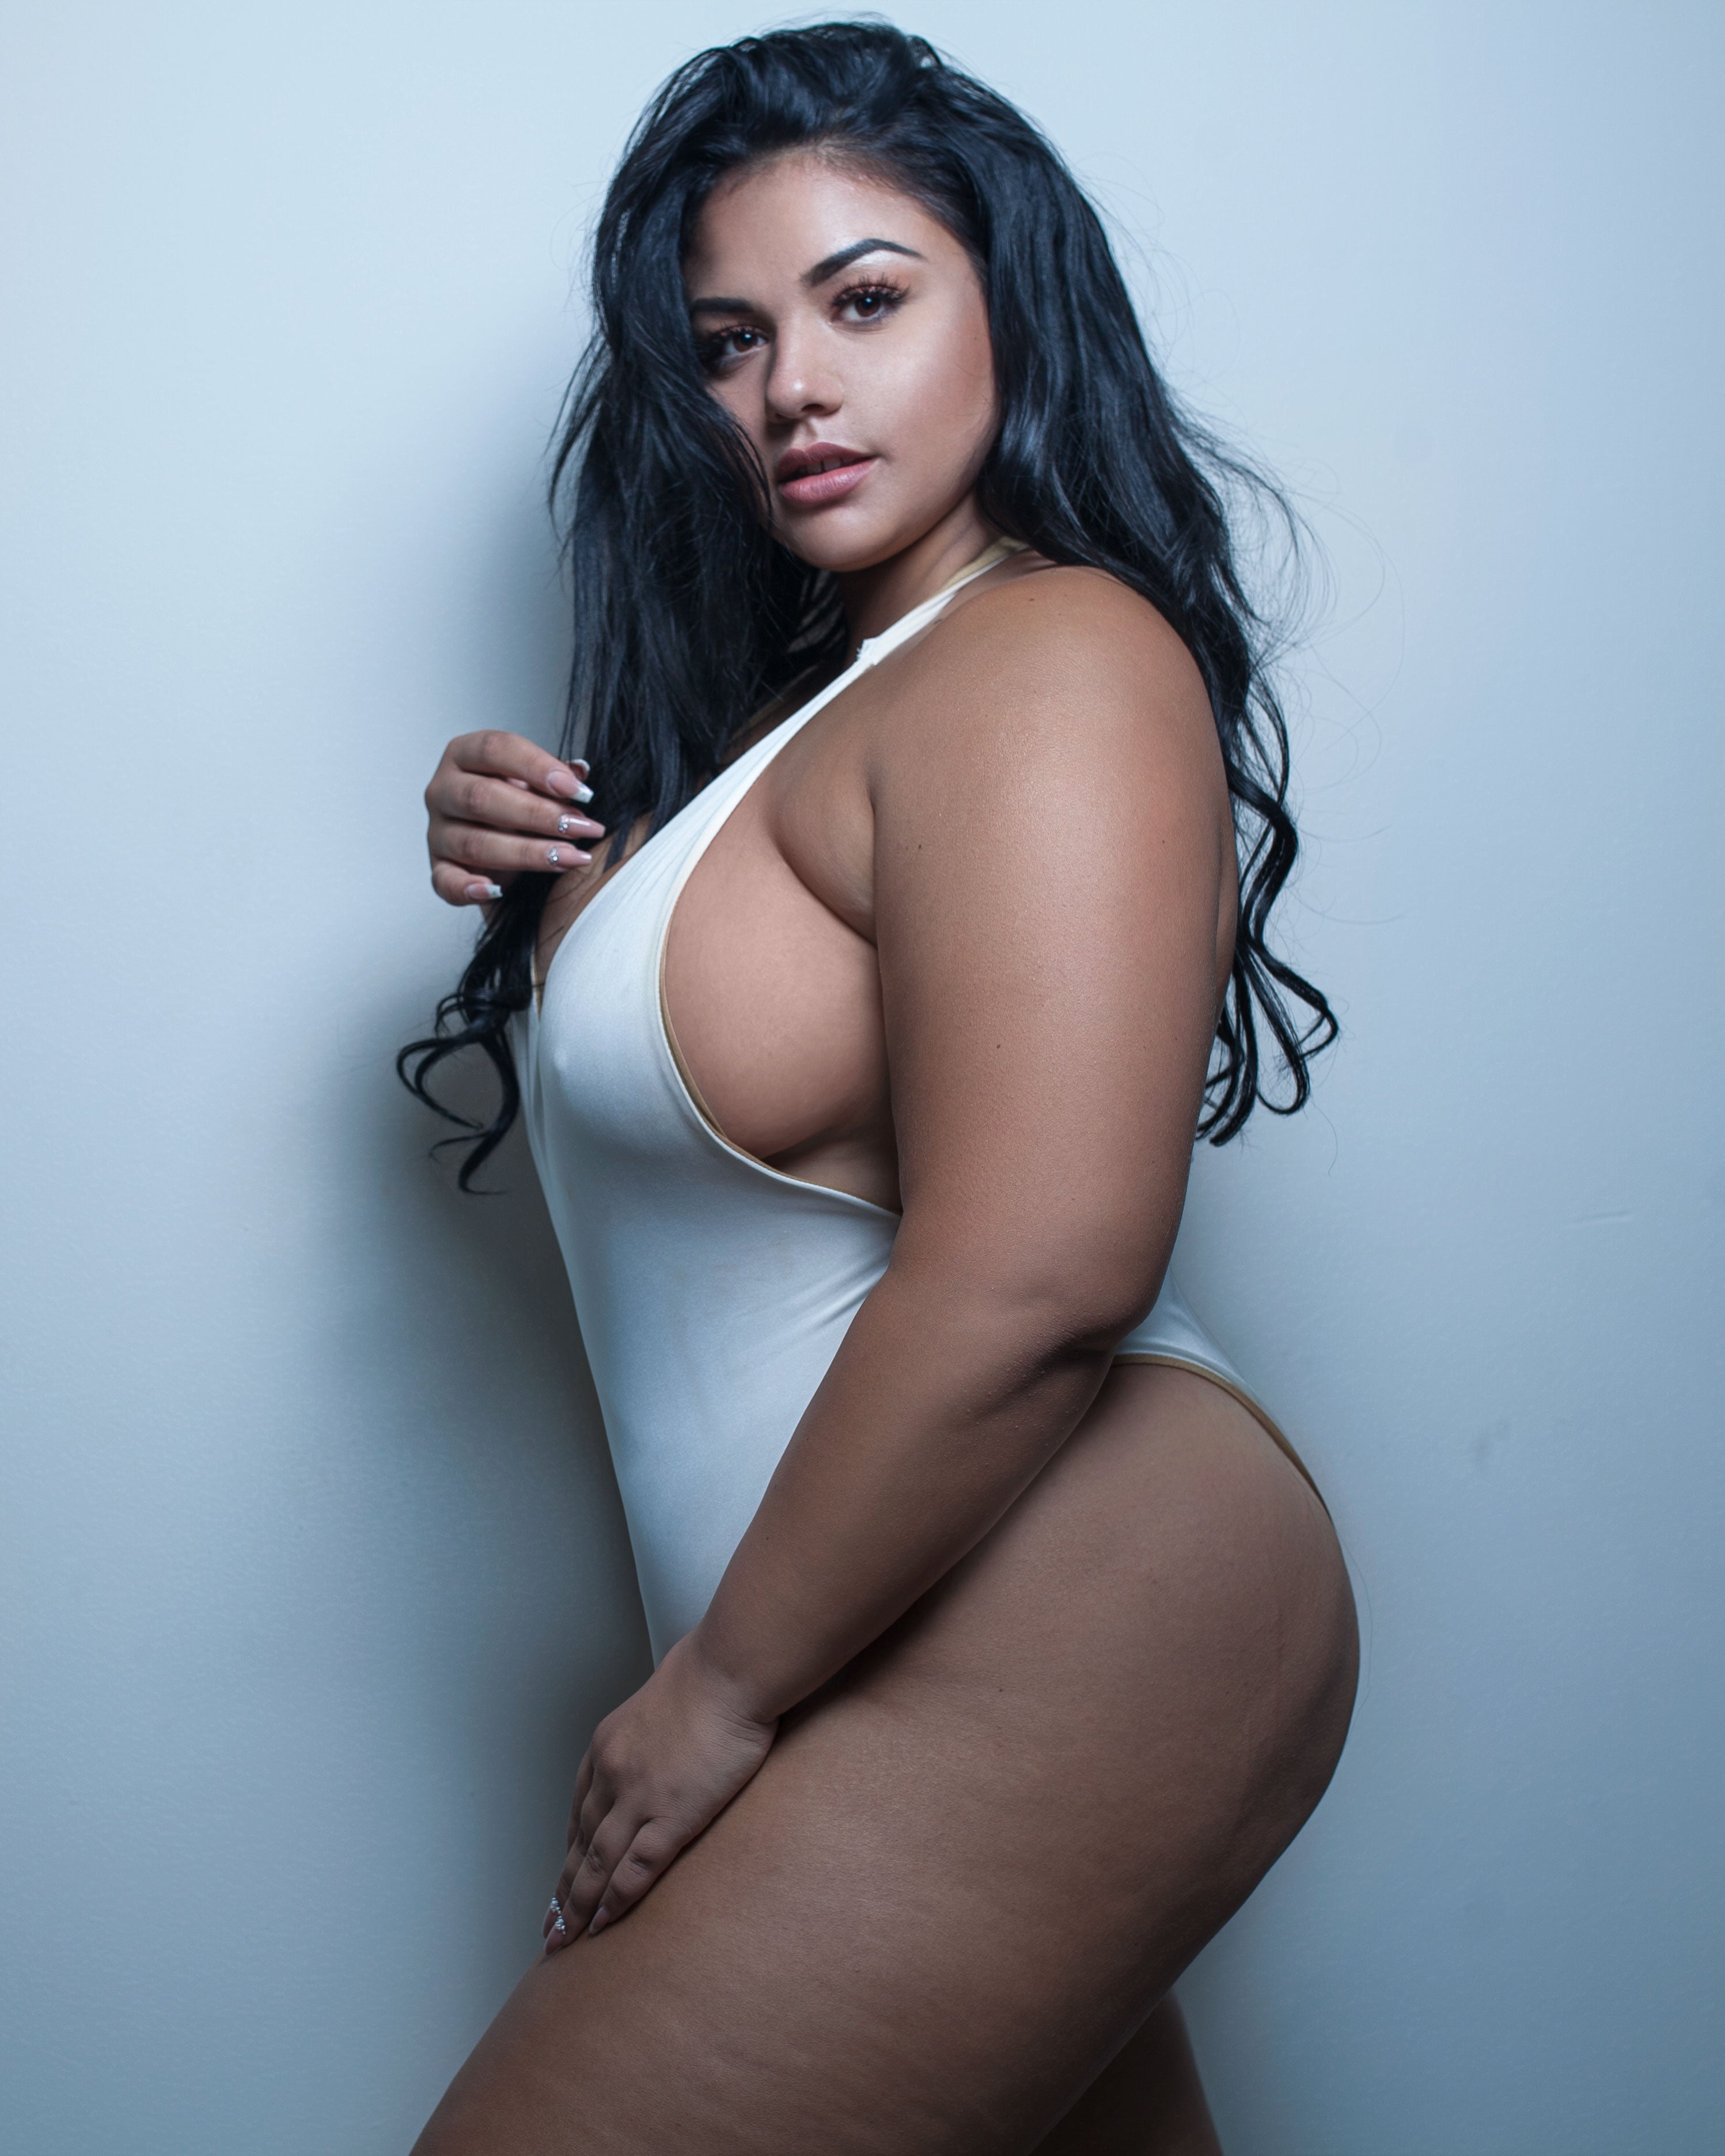 Plus size women in the nude ❤️ Best adult photos at